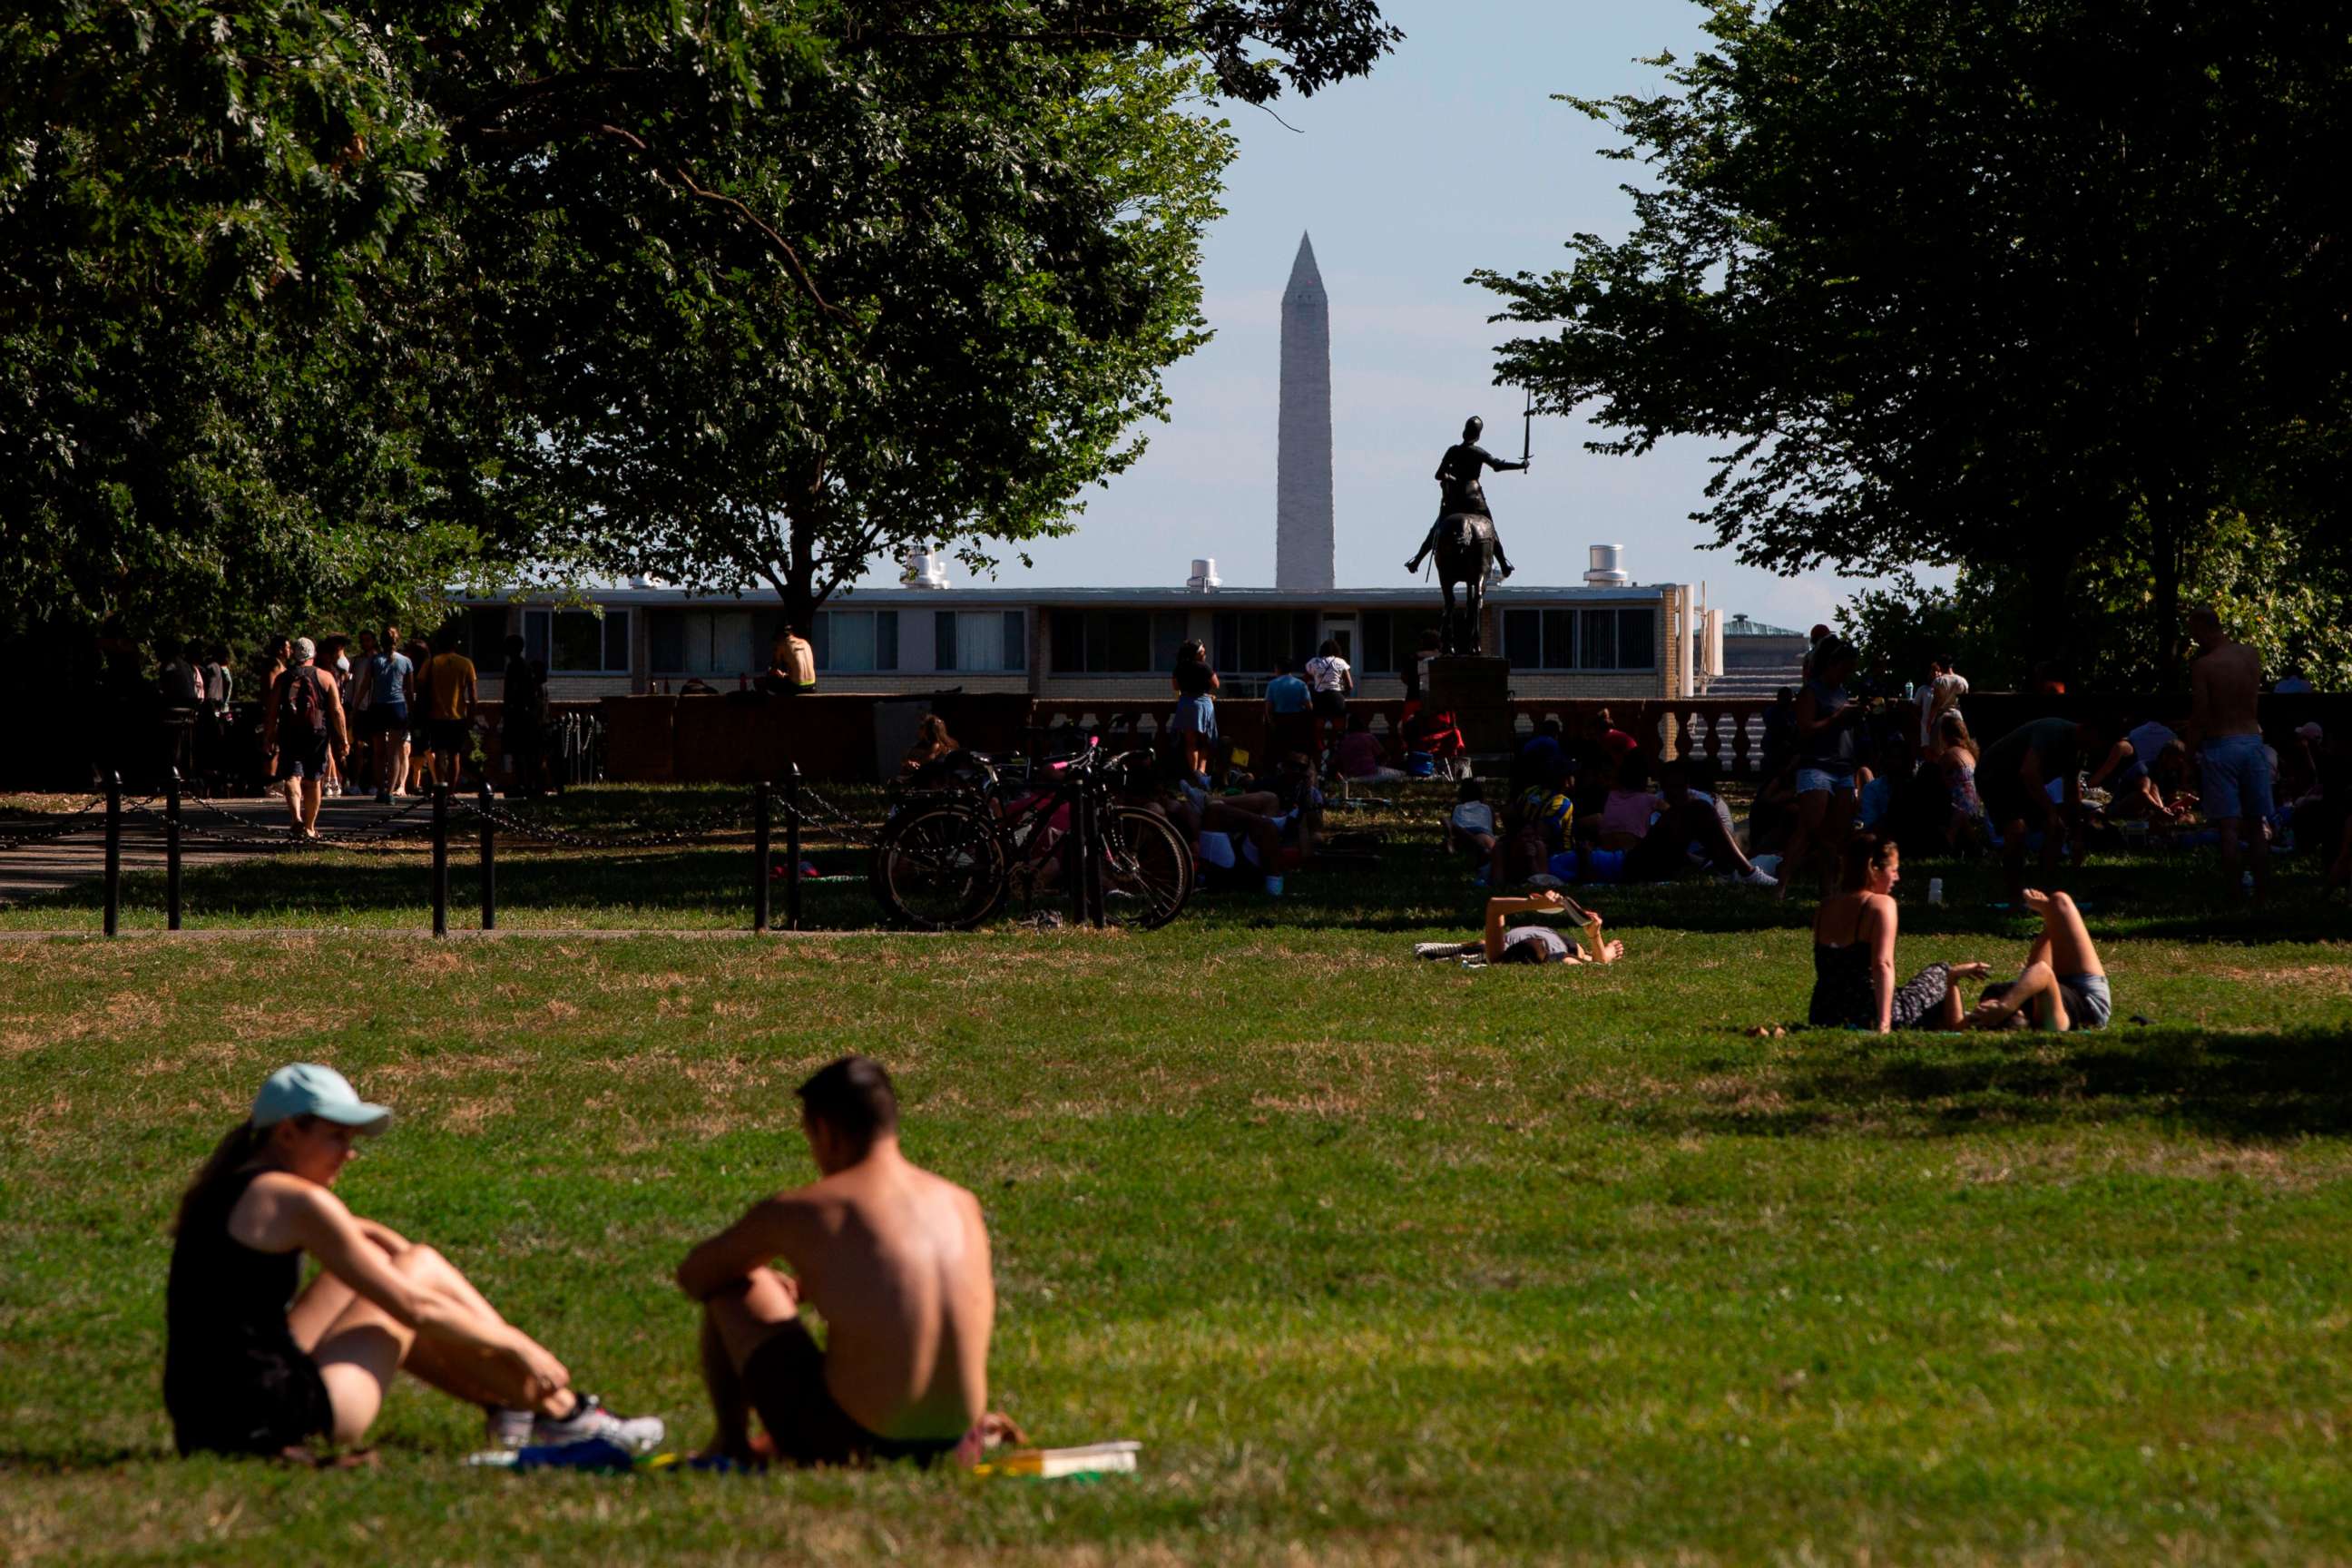 PHOTO: People relax at Meridian Hill Park on a summer day, with the Washington Monument in the distance, Aug. 11, 2019, in Washington, D.C.